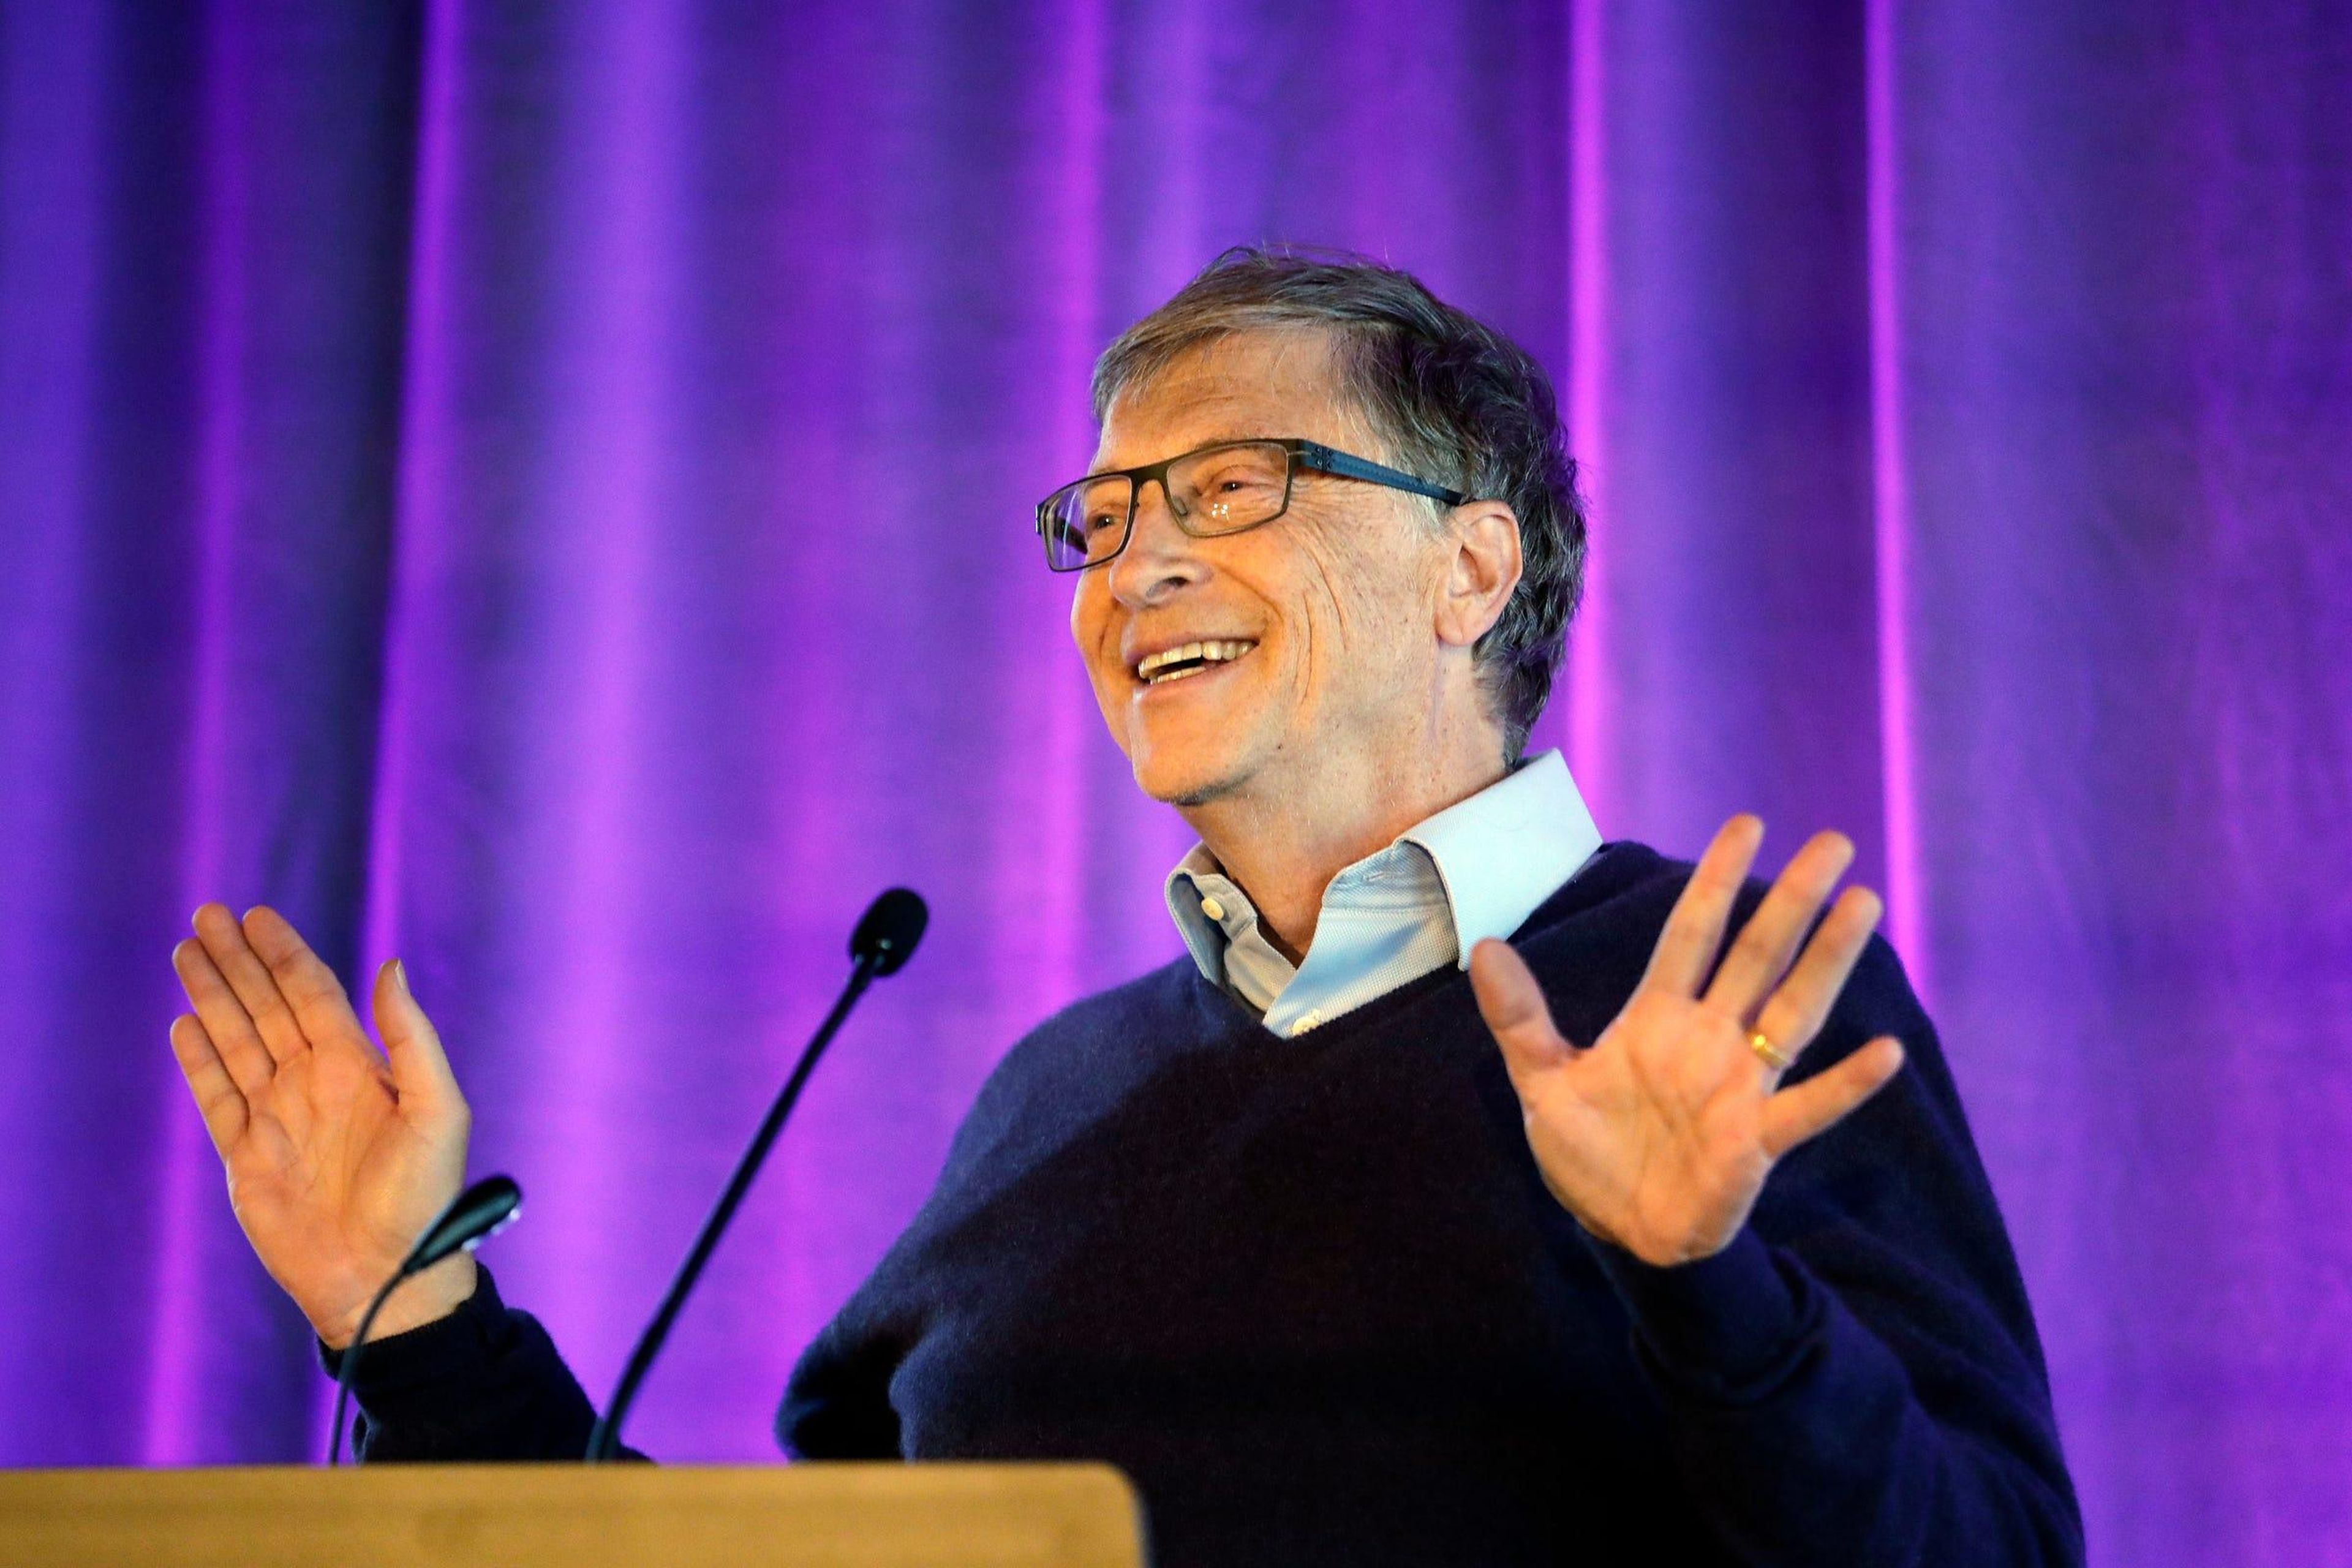 Bill Gates reveals the 6 unanswered questions he's pondering that are critical to understanding the coronavirus